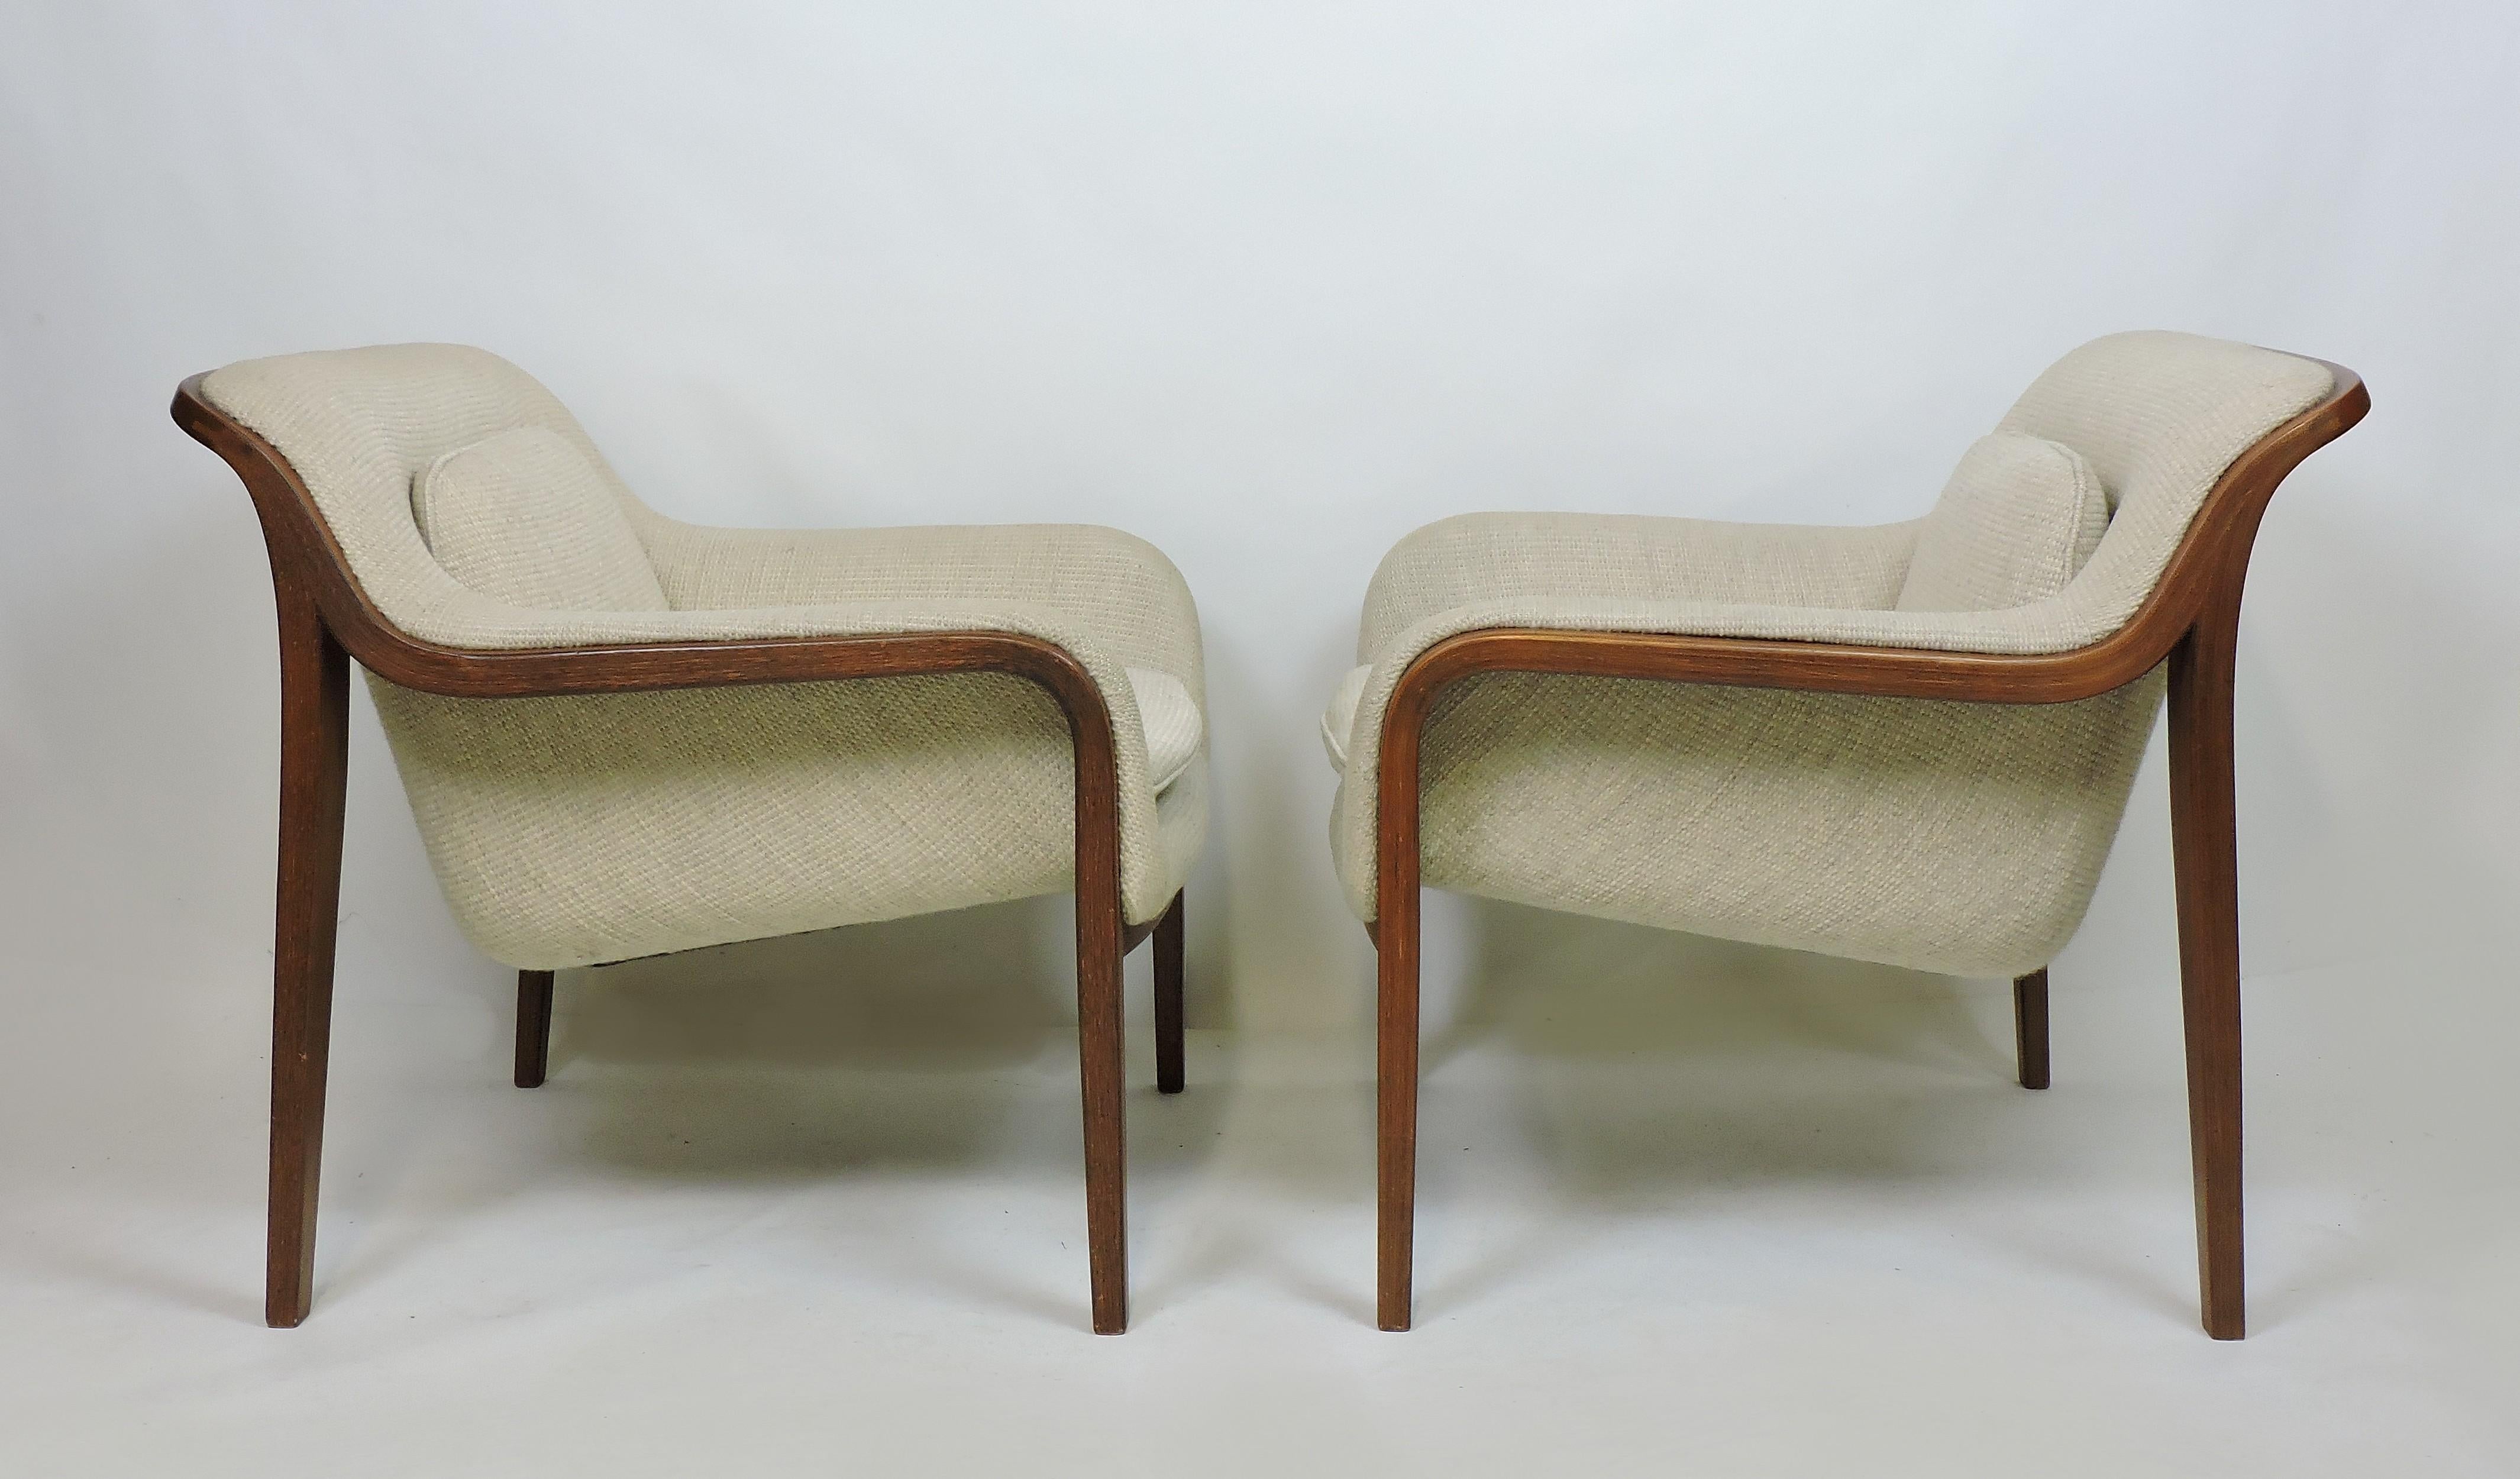 Beautiful pair of model #1315 lounge chairs designed by Bill Stephens for Knoll. These chairs have graceful sculptural bentwood frames and are upholstered in the original oatmeal colored nubby upholstery. Knoll labels underneath.
We also have